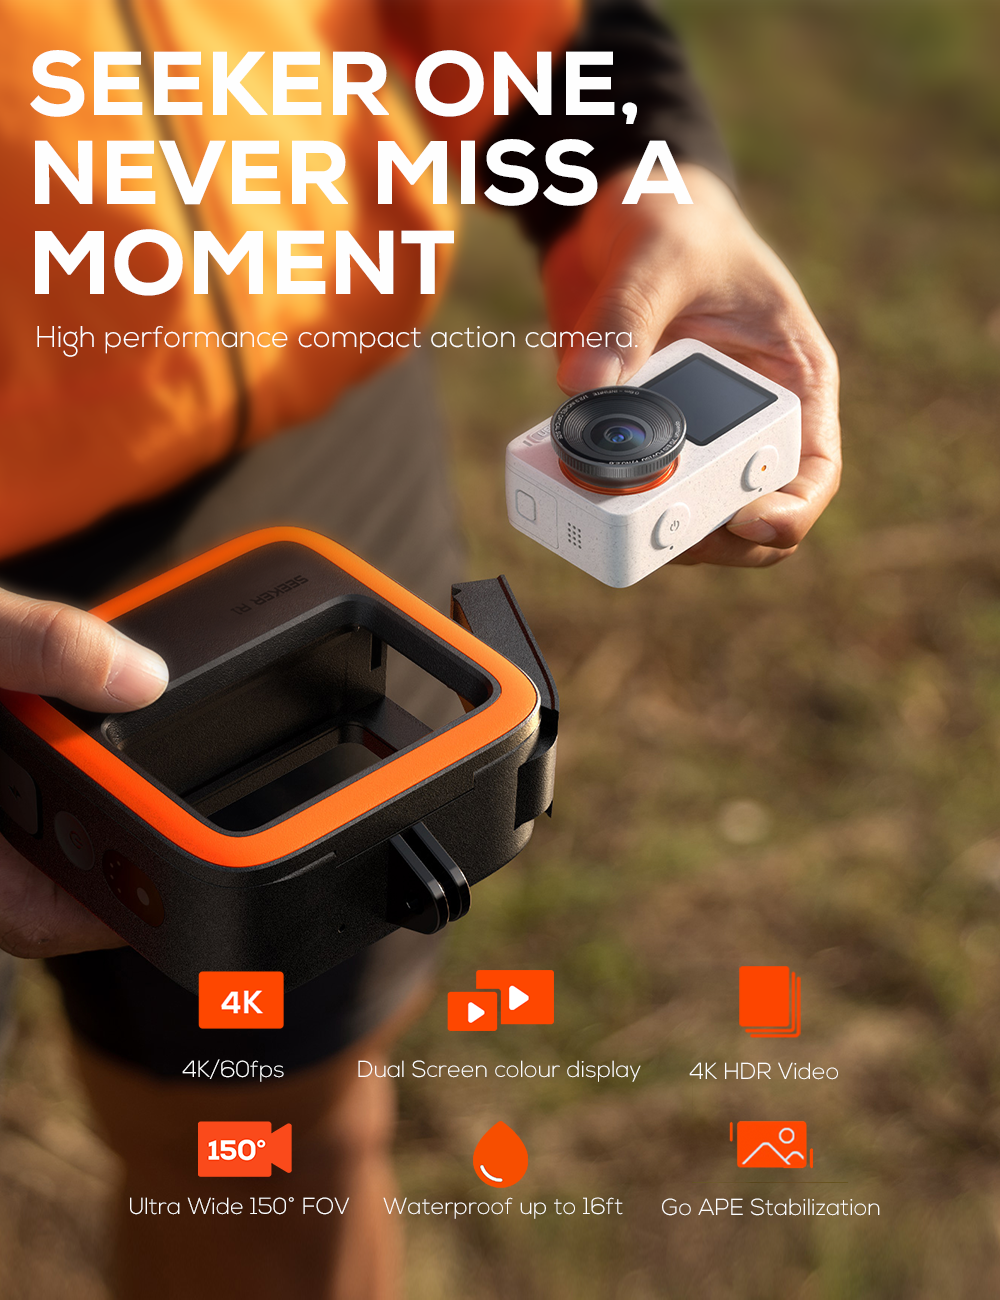 SEEKER ONE Action Camera